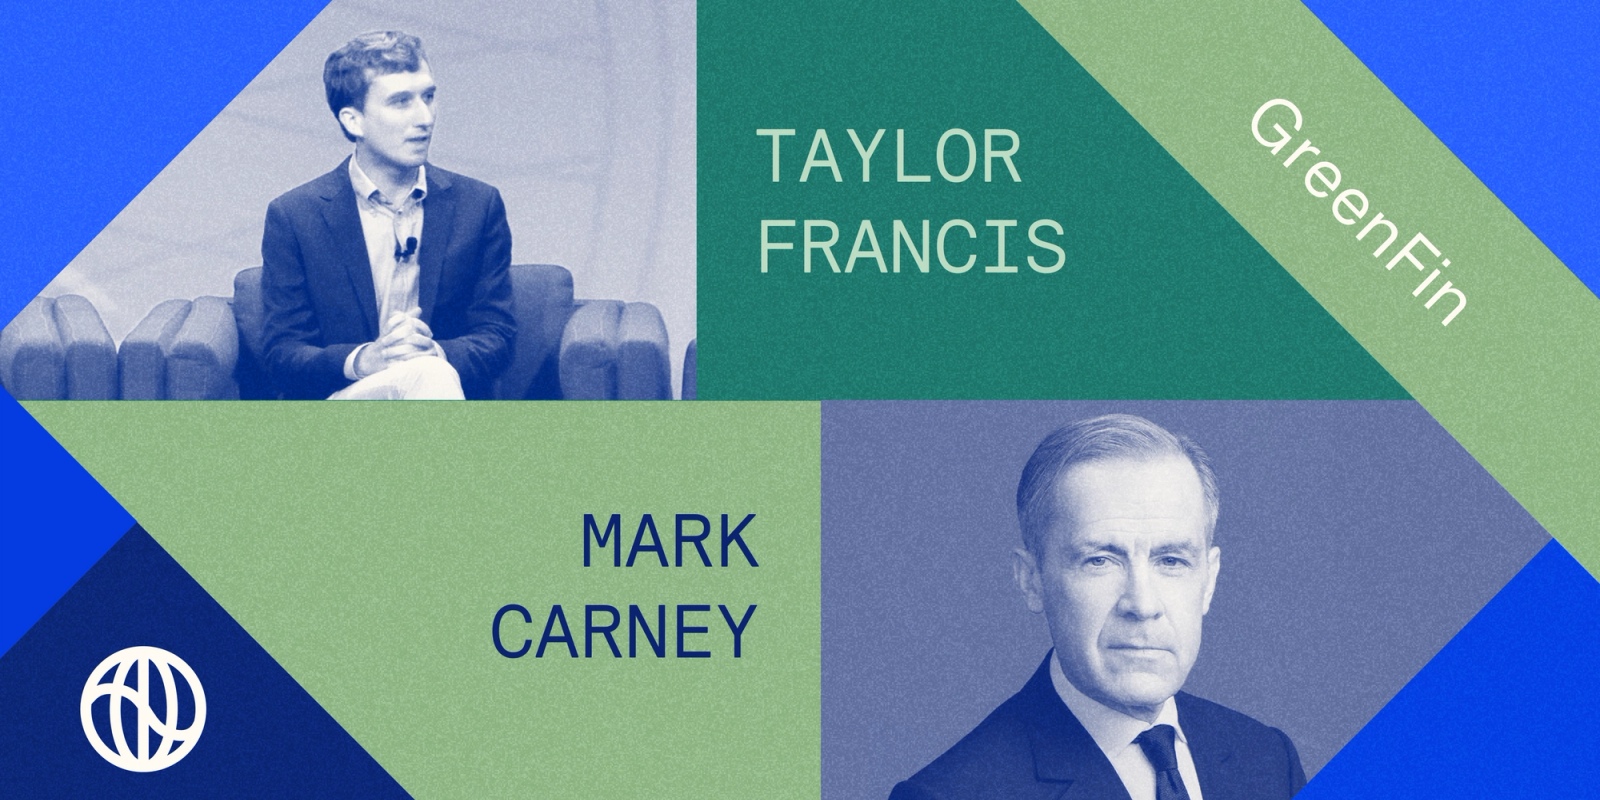 Turning commitments into action: Mark Carney and Taylor Francis at GreenFin 22